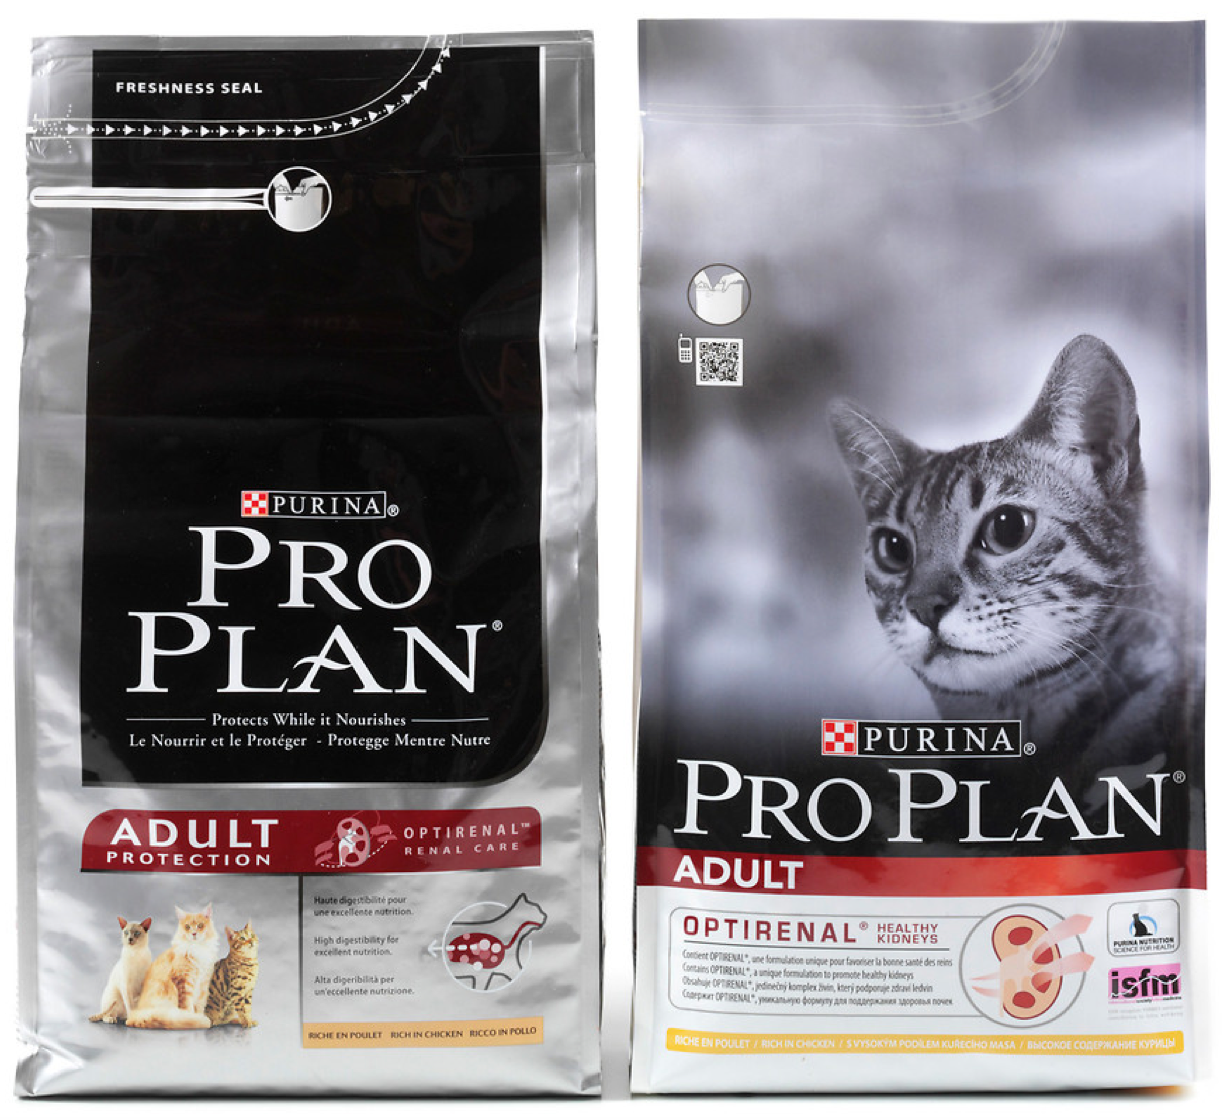 High Value $5/1 ANY Size Purina Pro Plan Cat Food + $5/1 Renew Cat